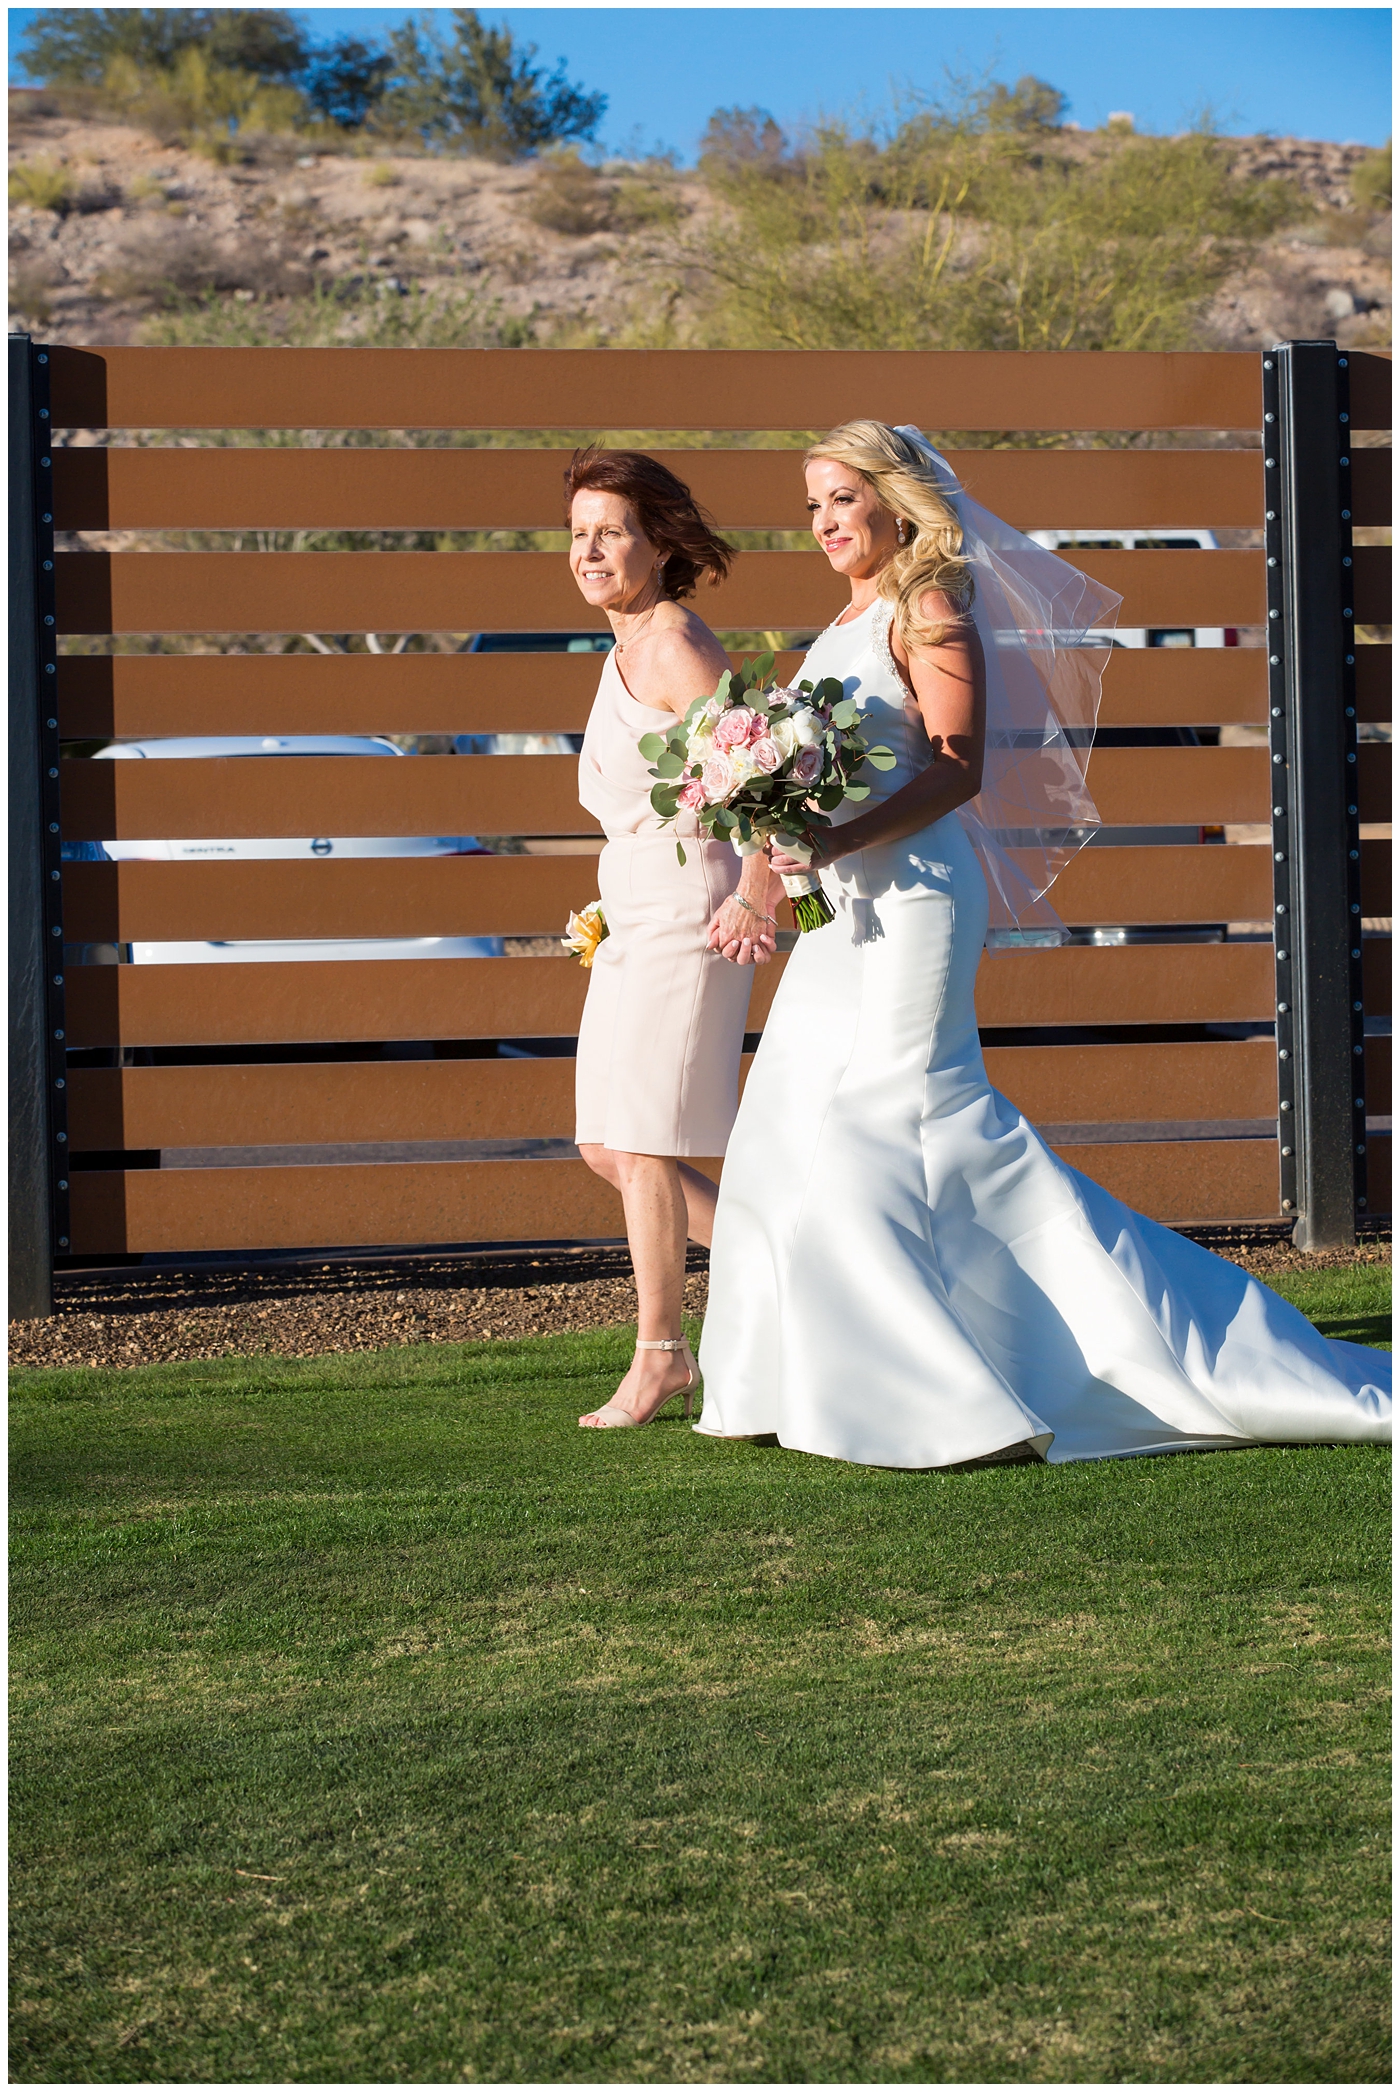 gorgeous bride with side swept hair in racerback pronovias wedding dress and blush pink, white rose and eucalyptus greenery wedding bouquet walking down the aisle at wedding ceremony